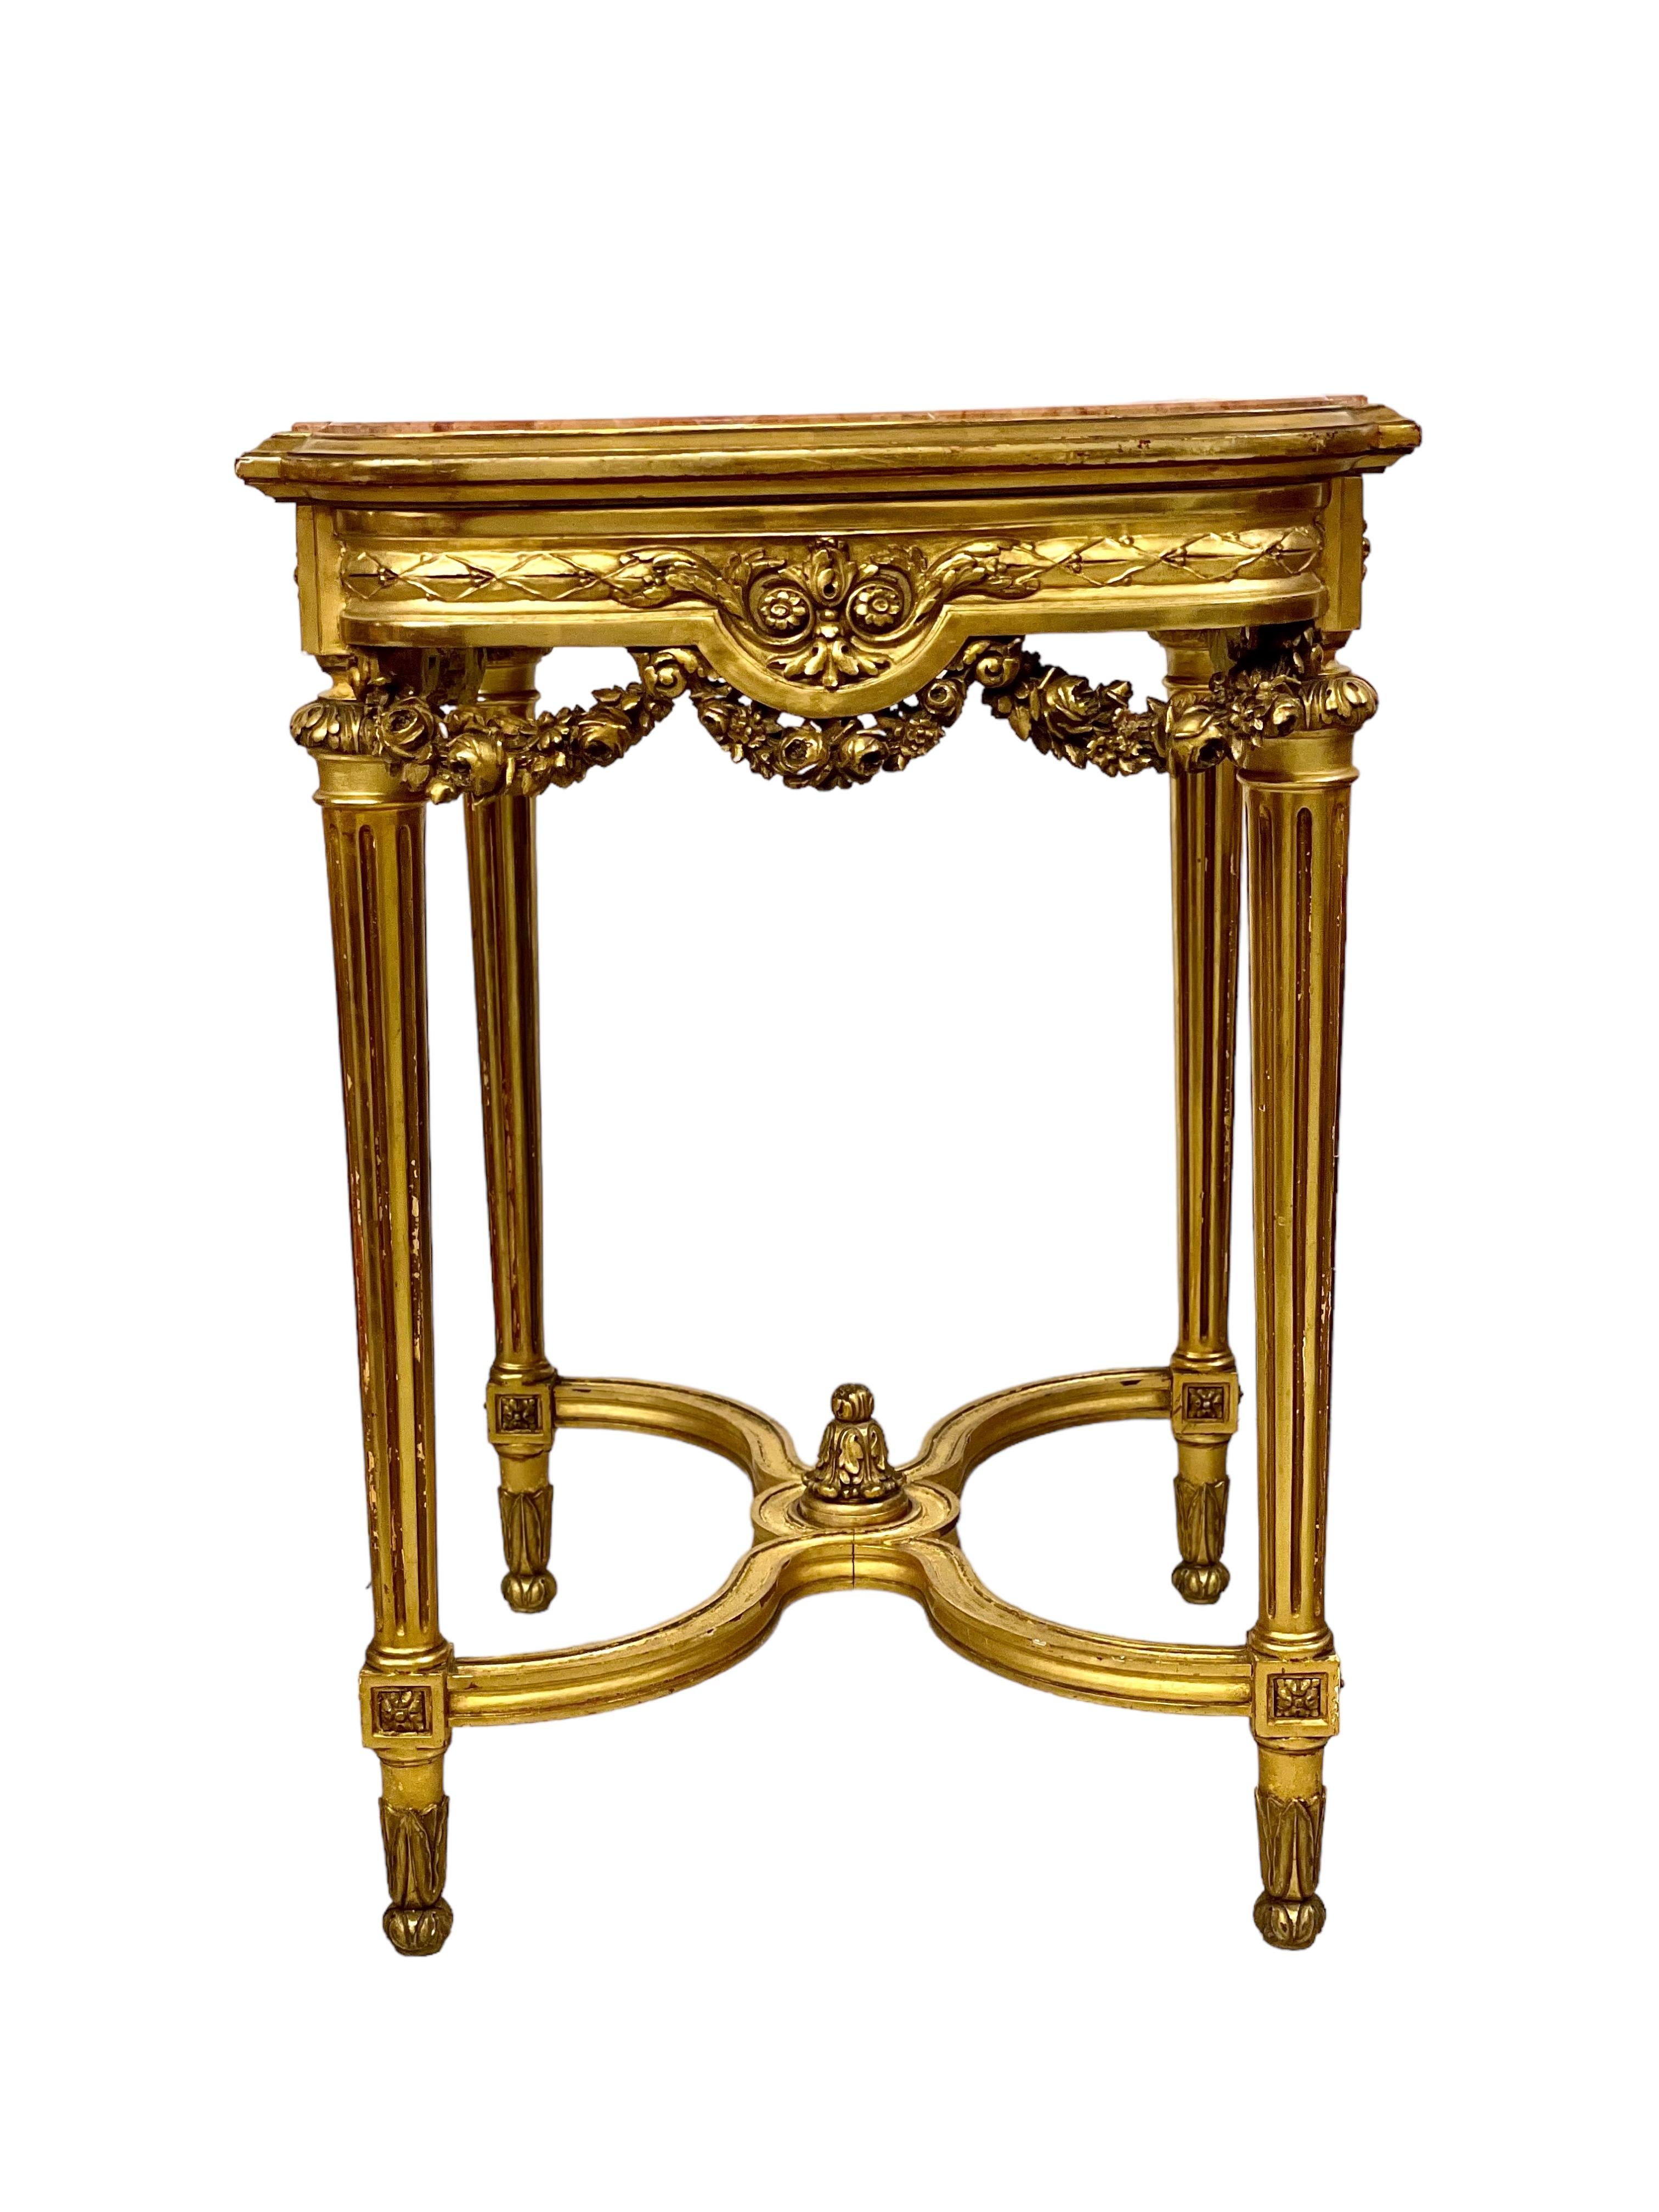 Gilt Louis XVI Gilded Center Table with Pink Veined Marble Top